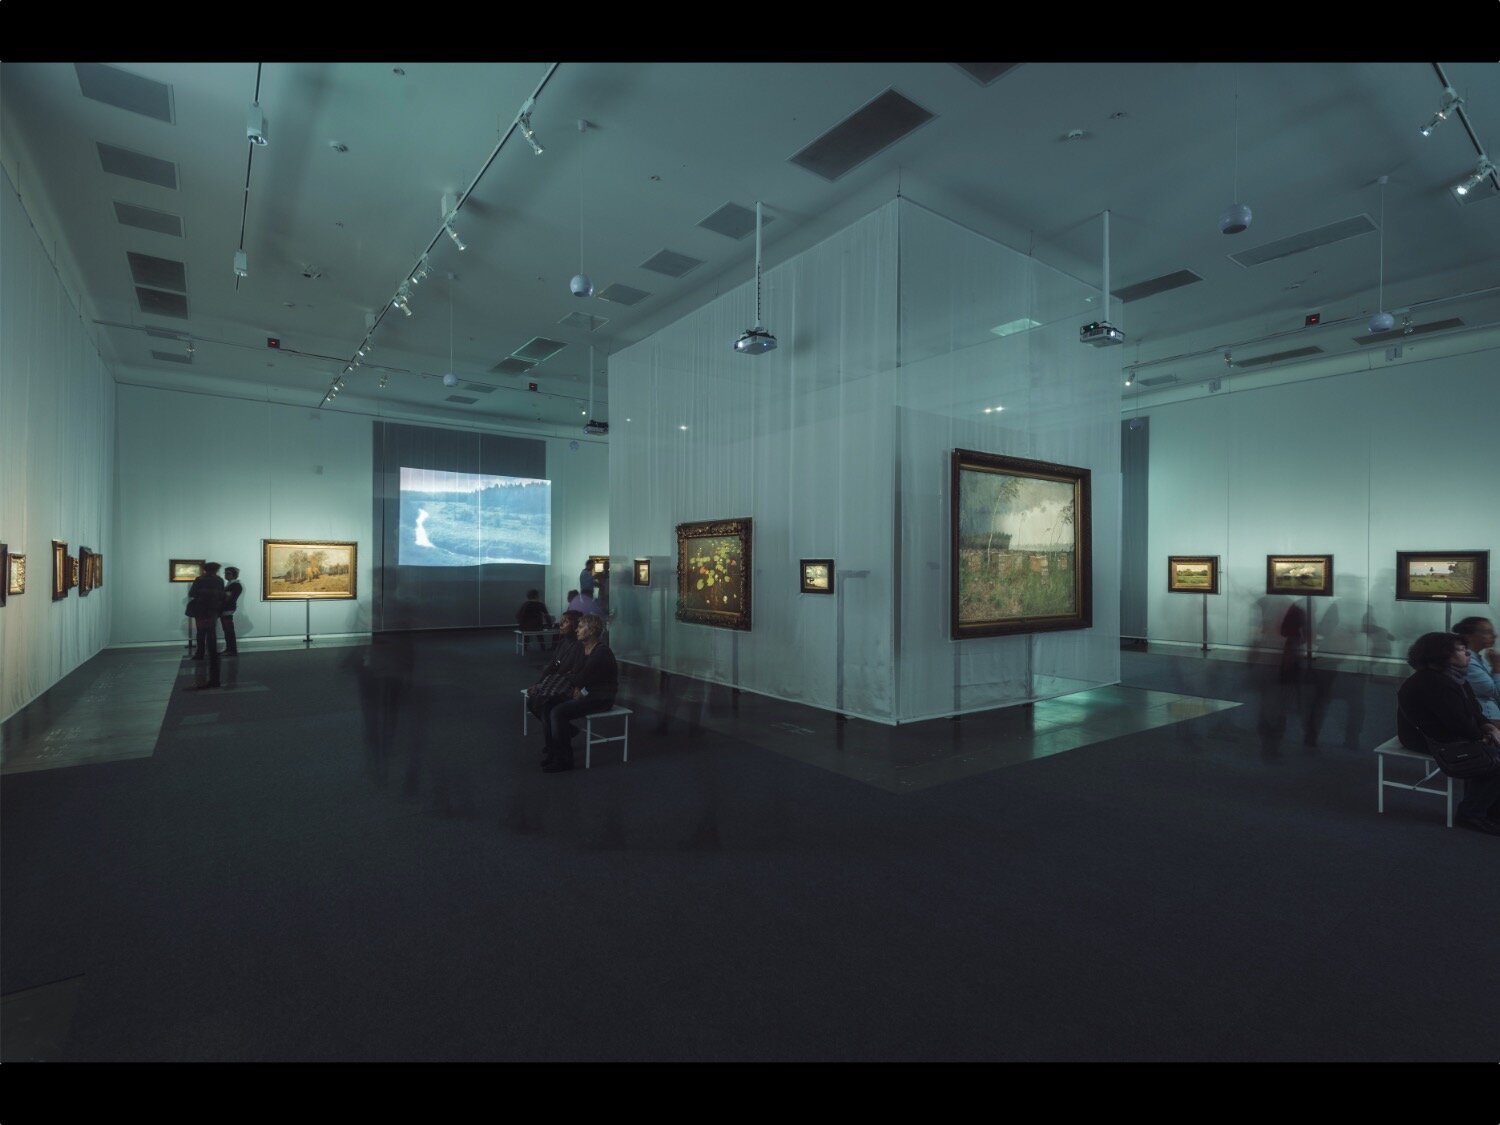  Isaac Levitan and Cinematography
Jewish Museum and Tolerance Center
Moscow, 2018
(photo courtesy of JMTC) 